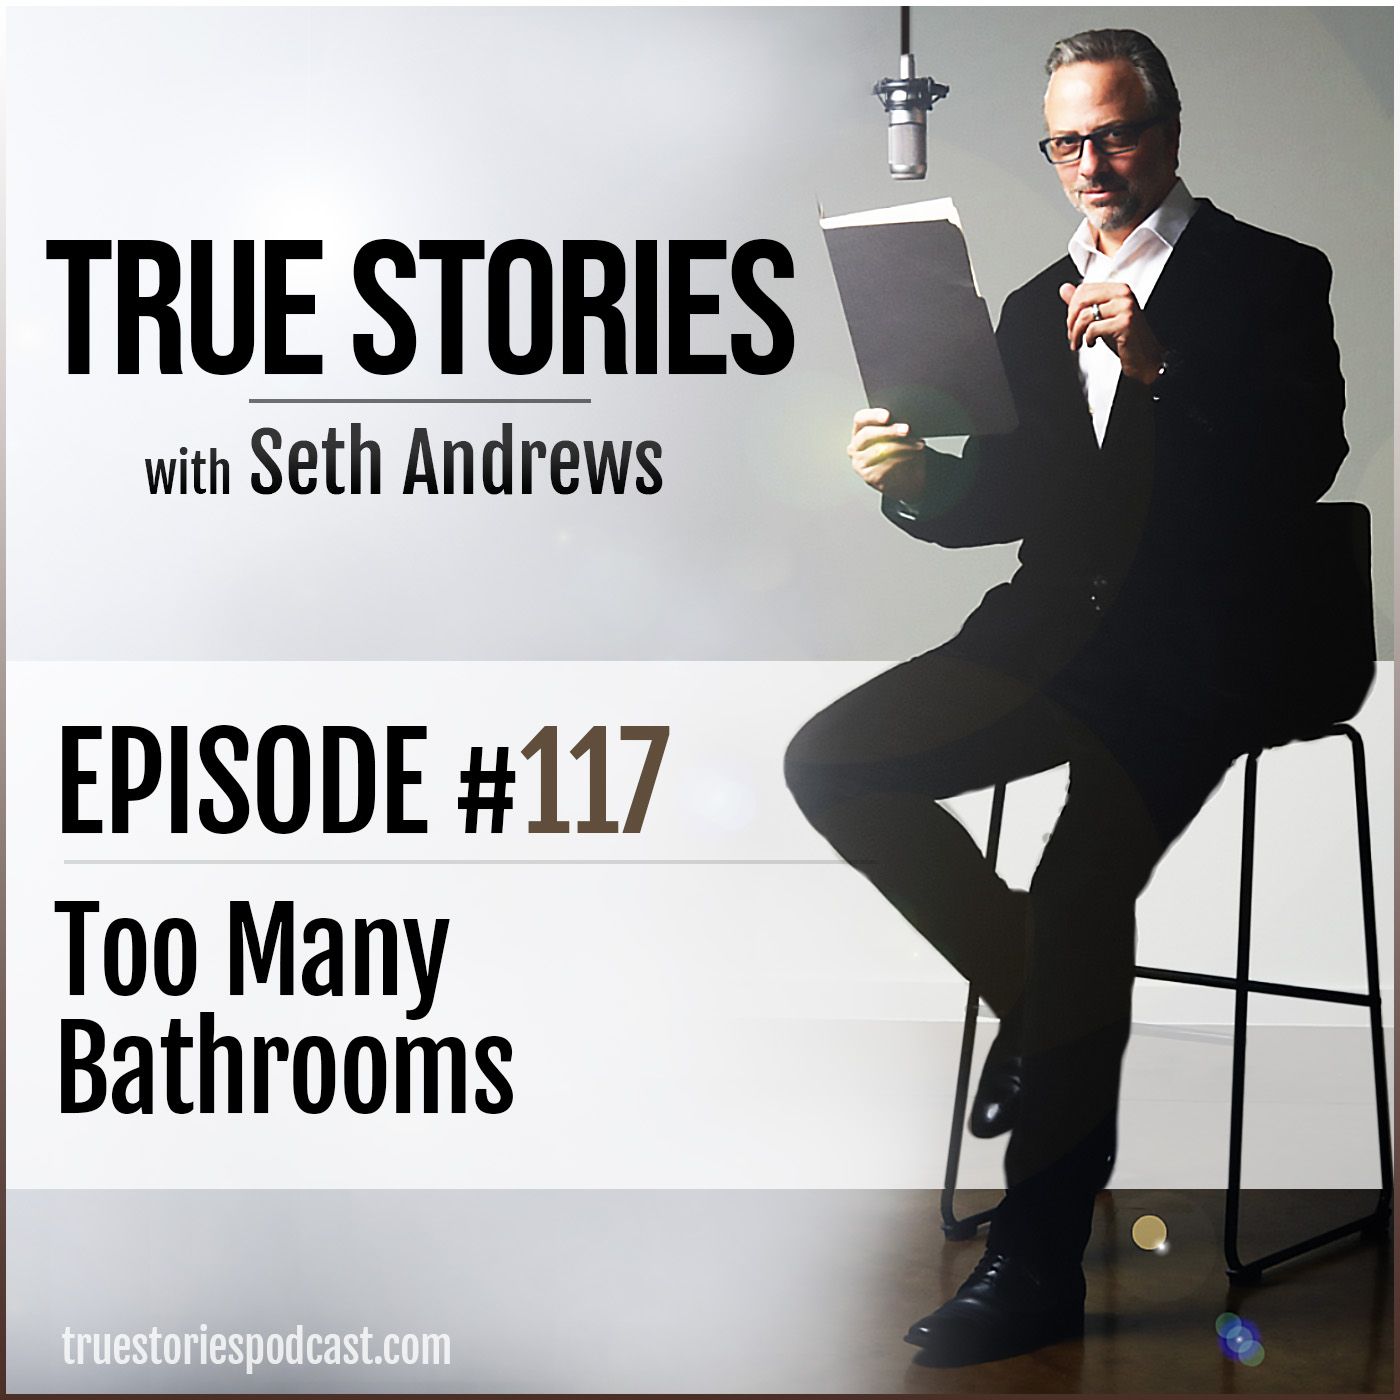 True Stories #117 - Too Many Bathrooms